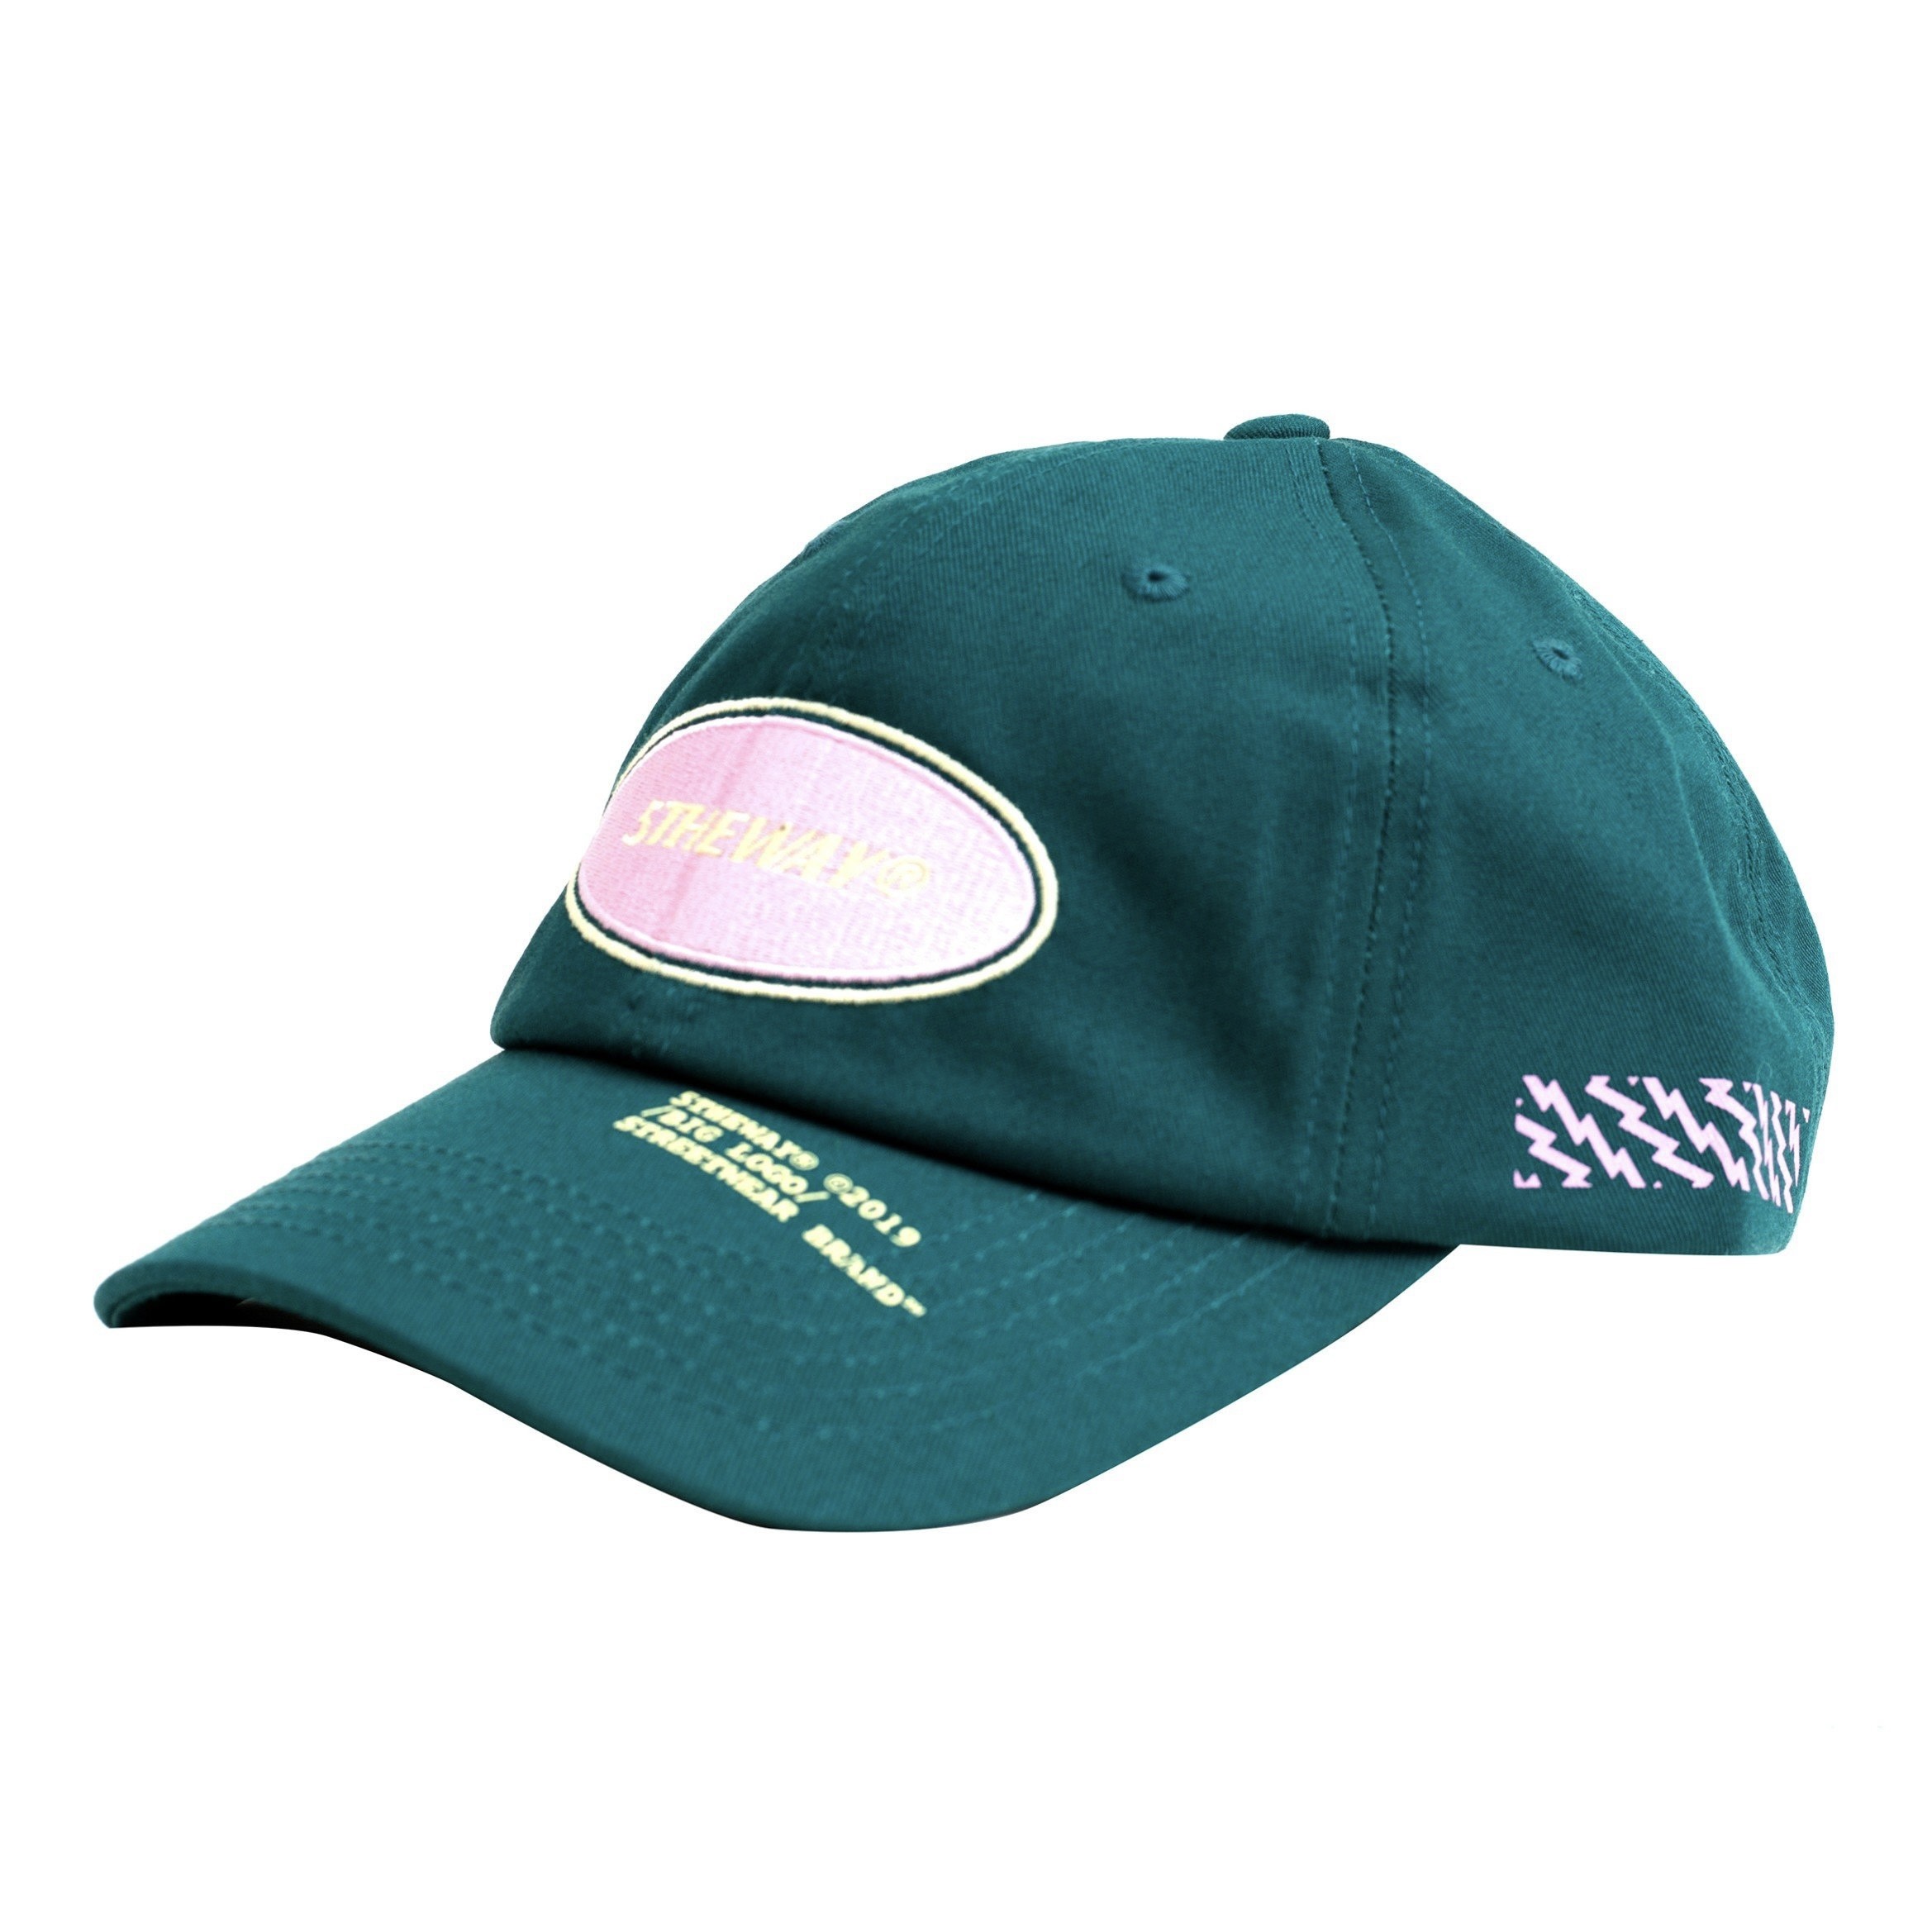 Nón Lưỡi Trai 5THEWAY Xanh Lá aka 5THEWAY /oval/ Unstructure Washed Dad Cap in STORM